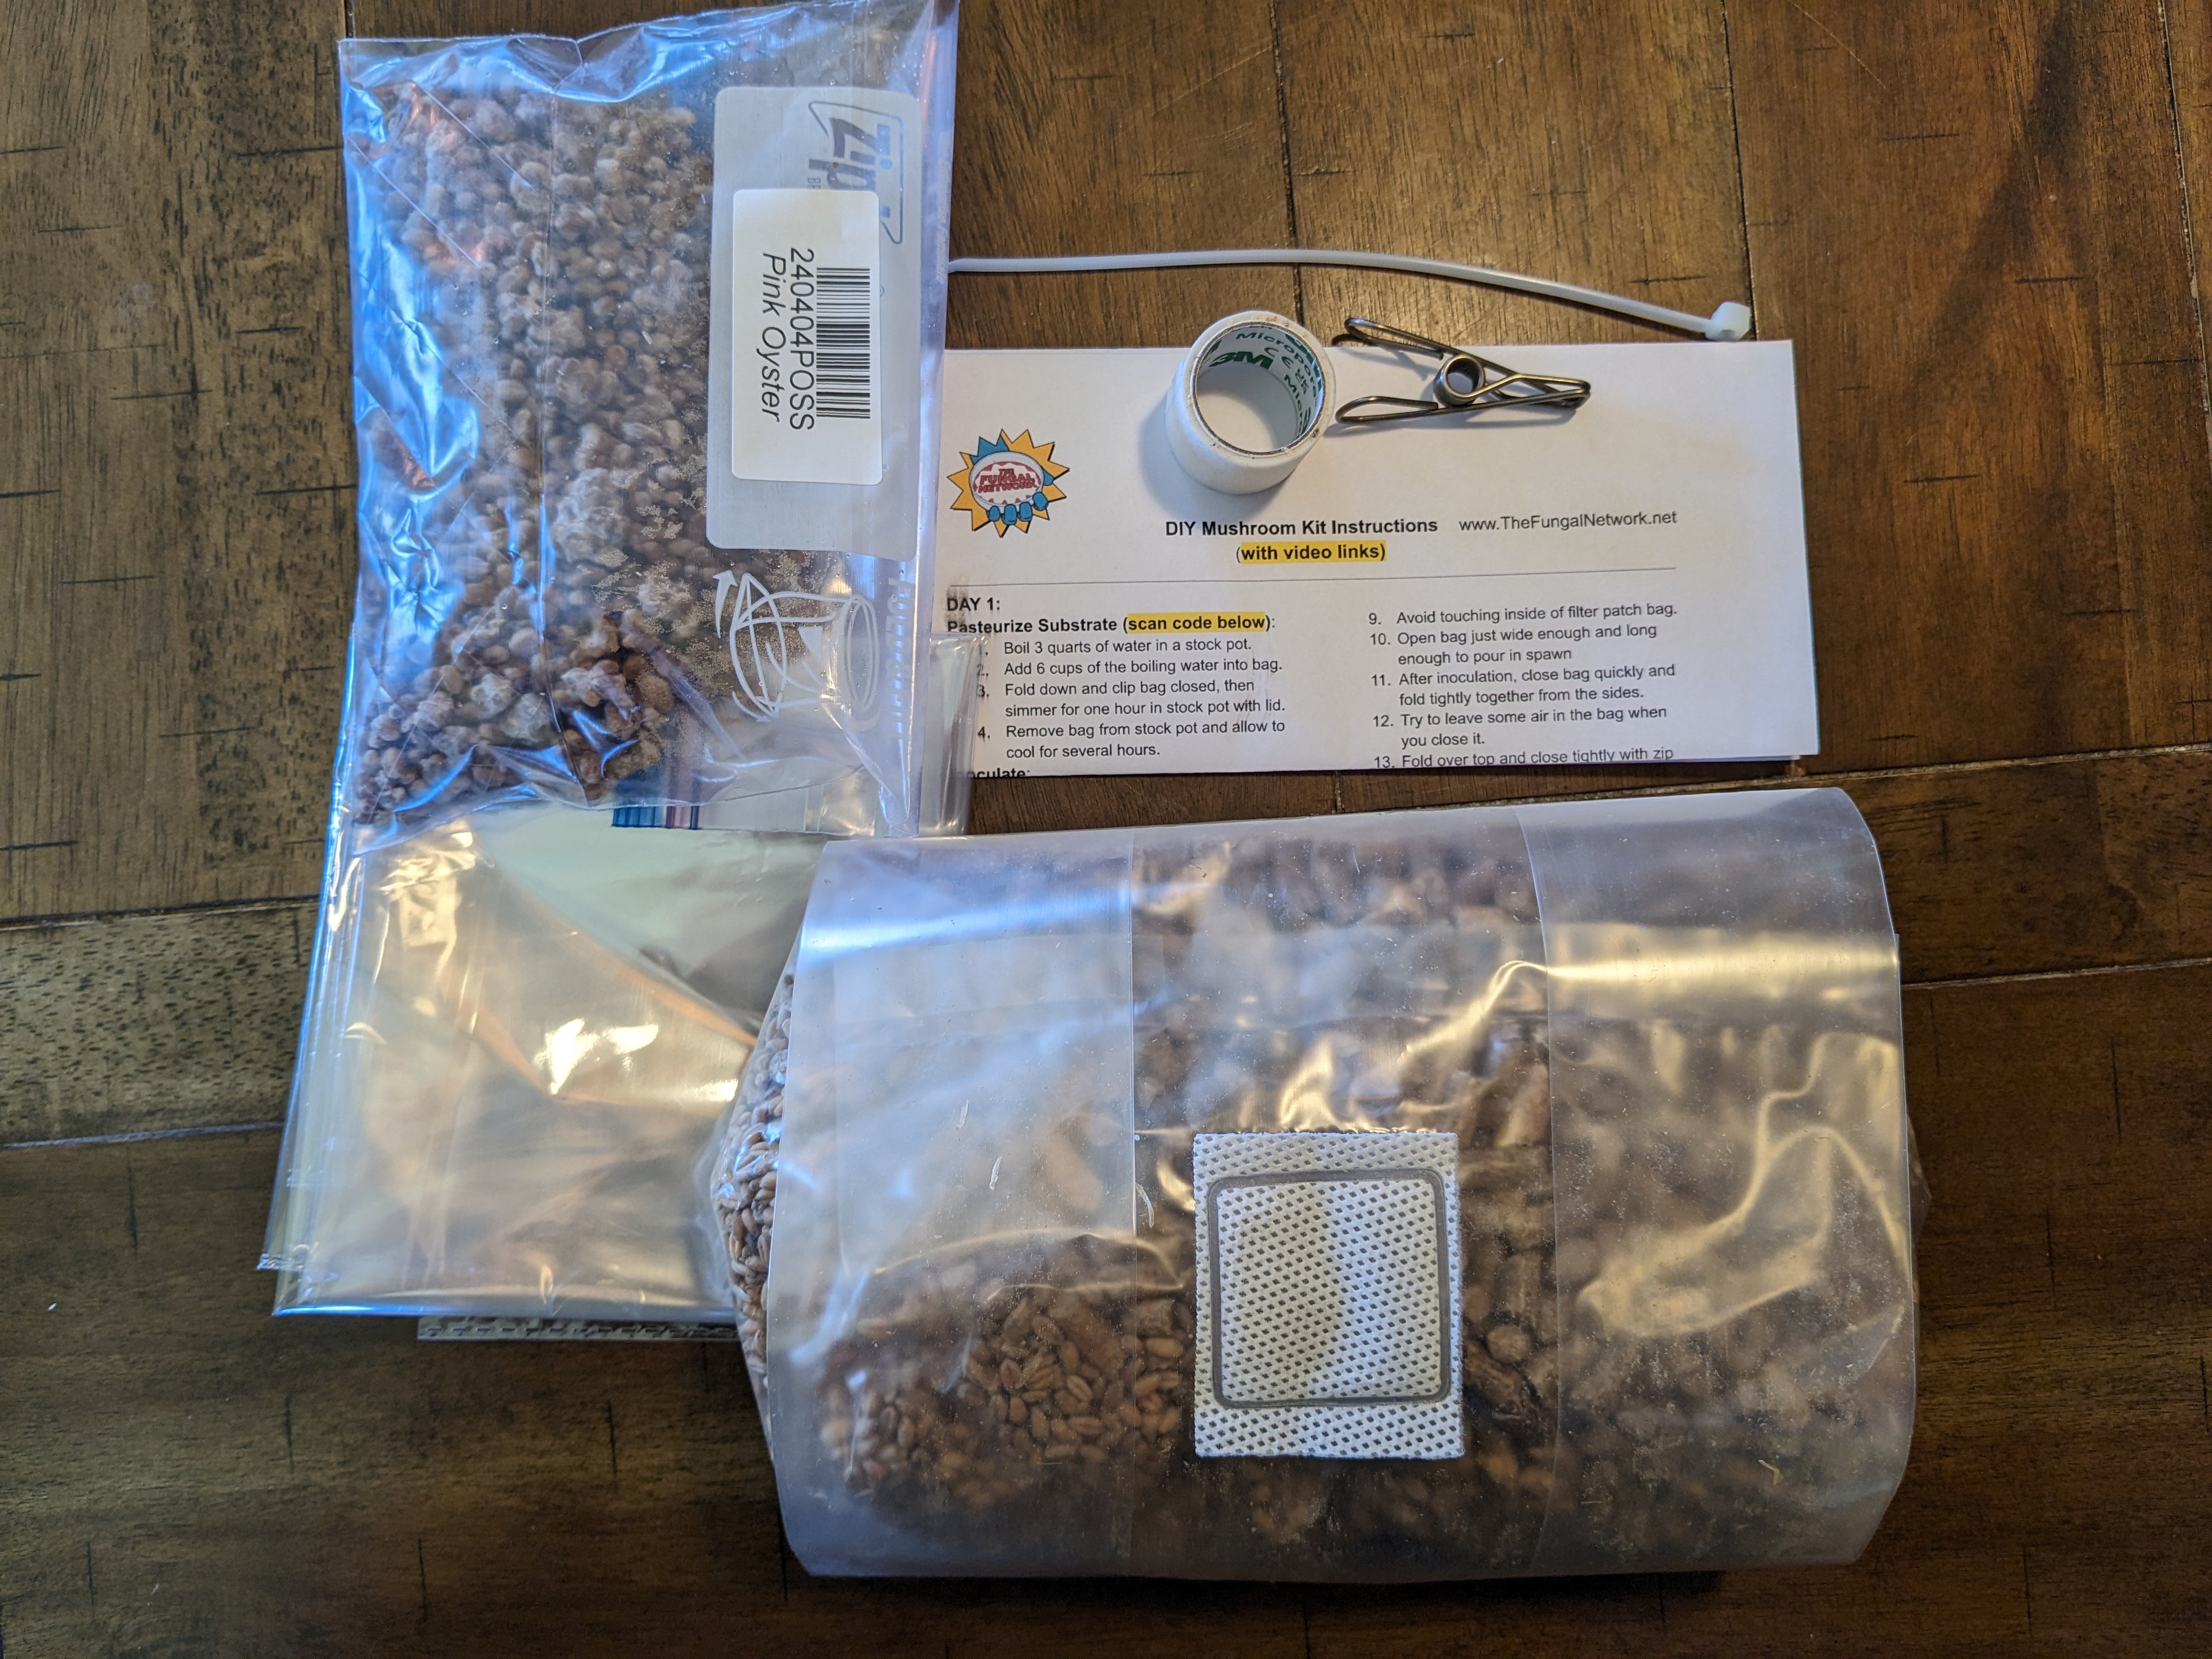 Load video: Growing and preparing mushrooms from a grow-at-home mushroom kit